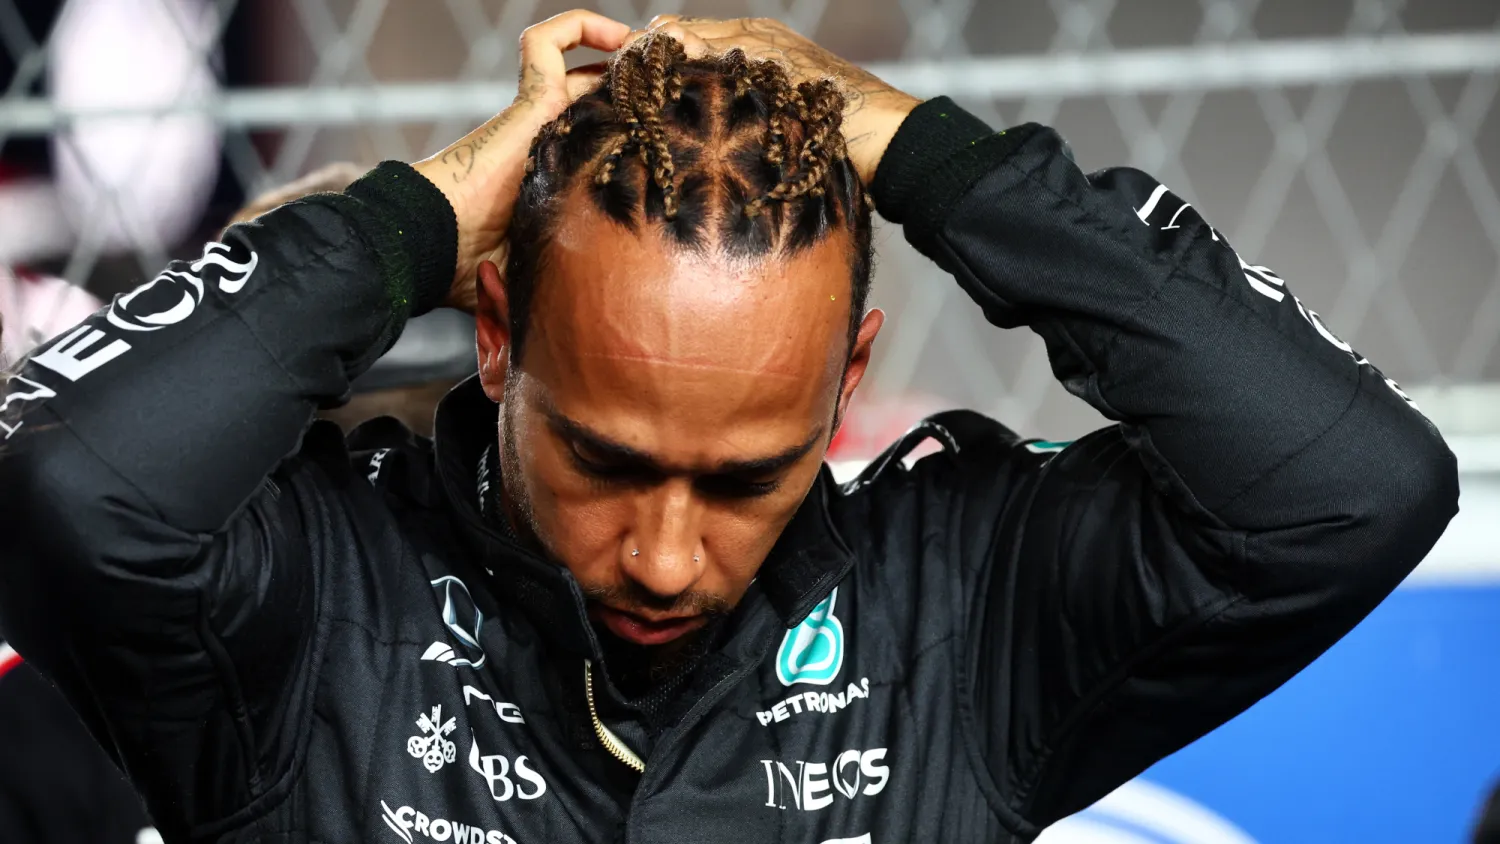 Lewis Hamilton: “Battling Self-Doubt Was the Hardest Part of My Year”